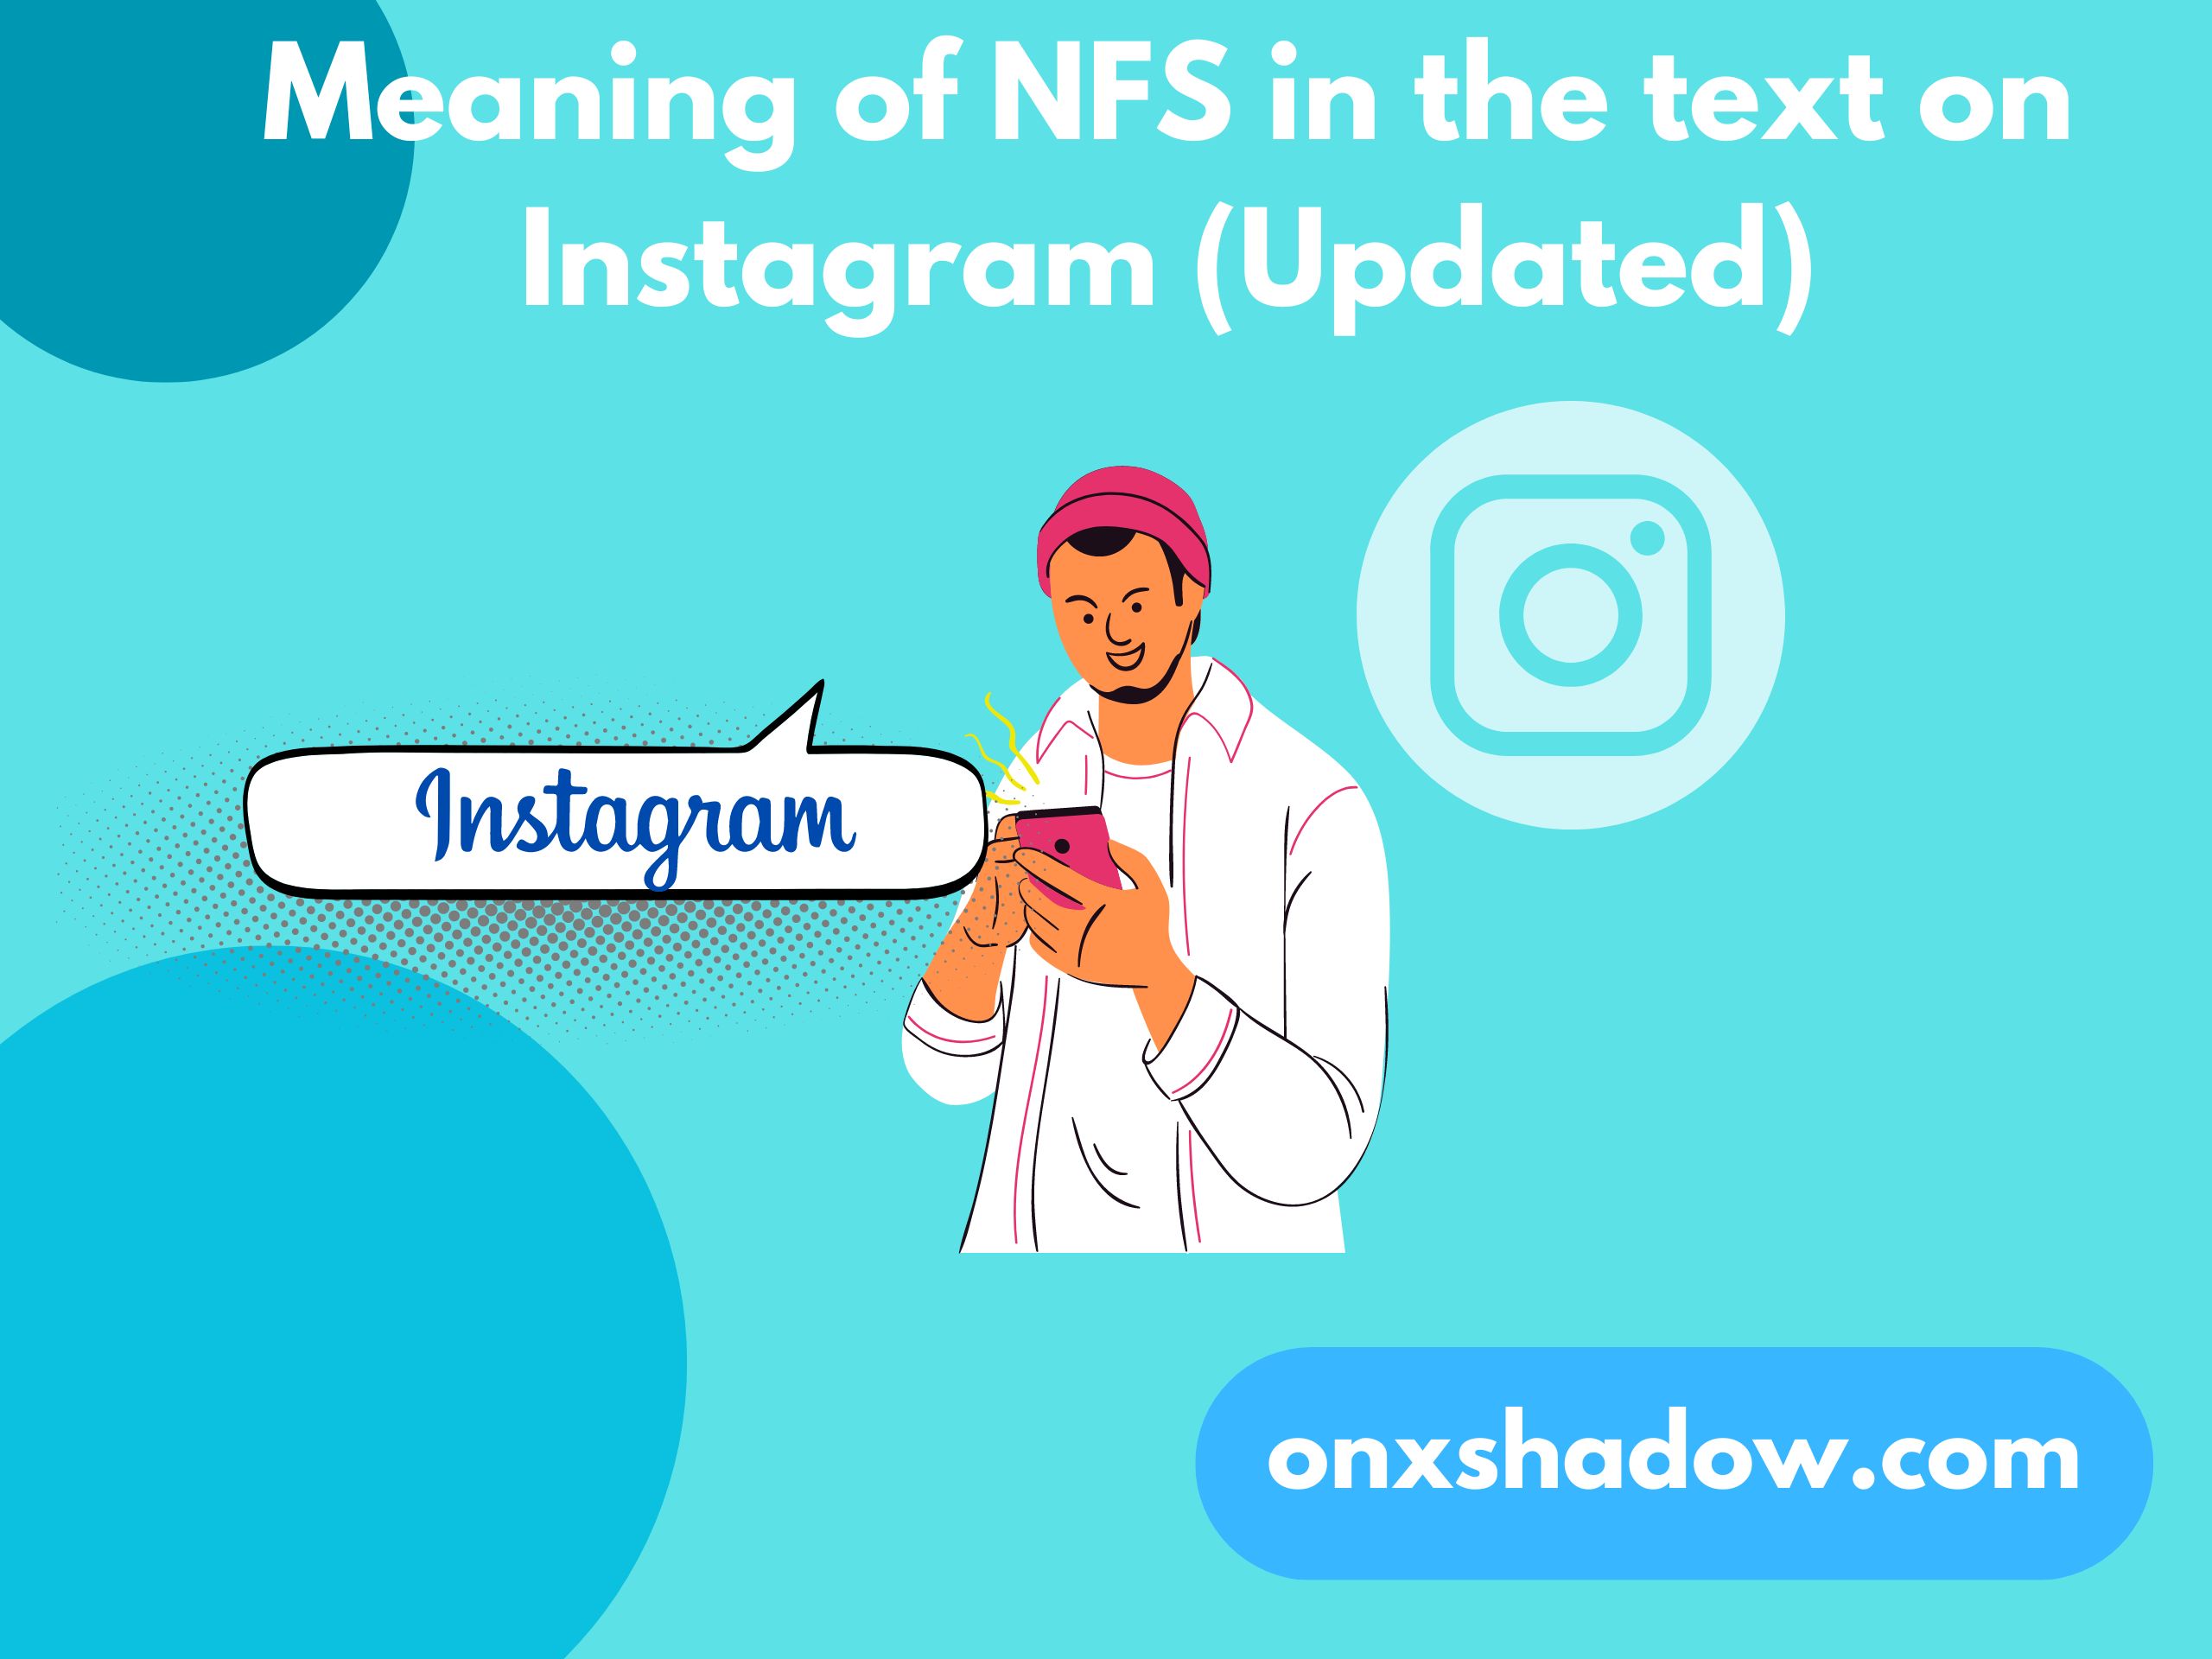 Meaning of NFS in the text on Instagram (Updated)